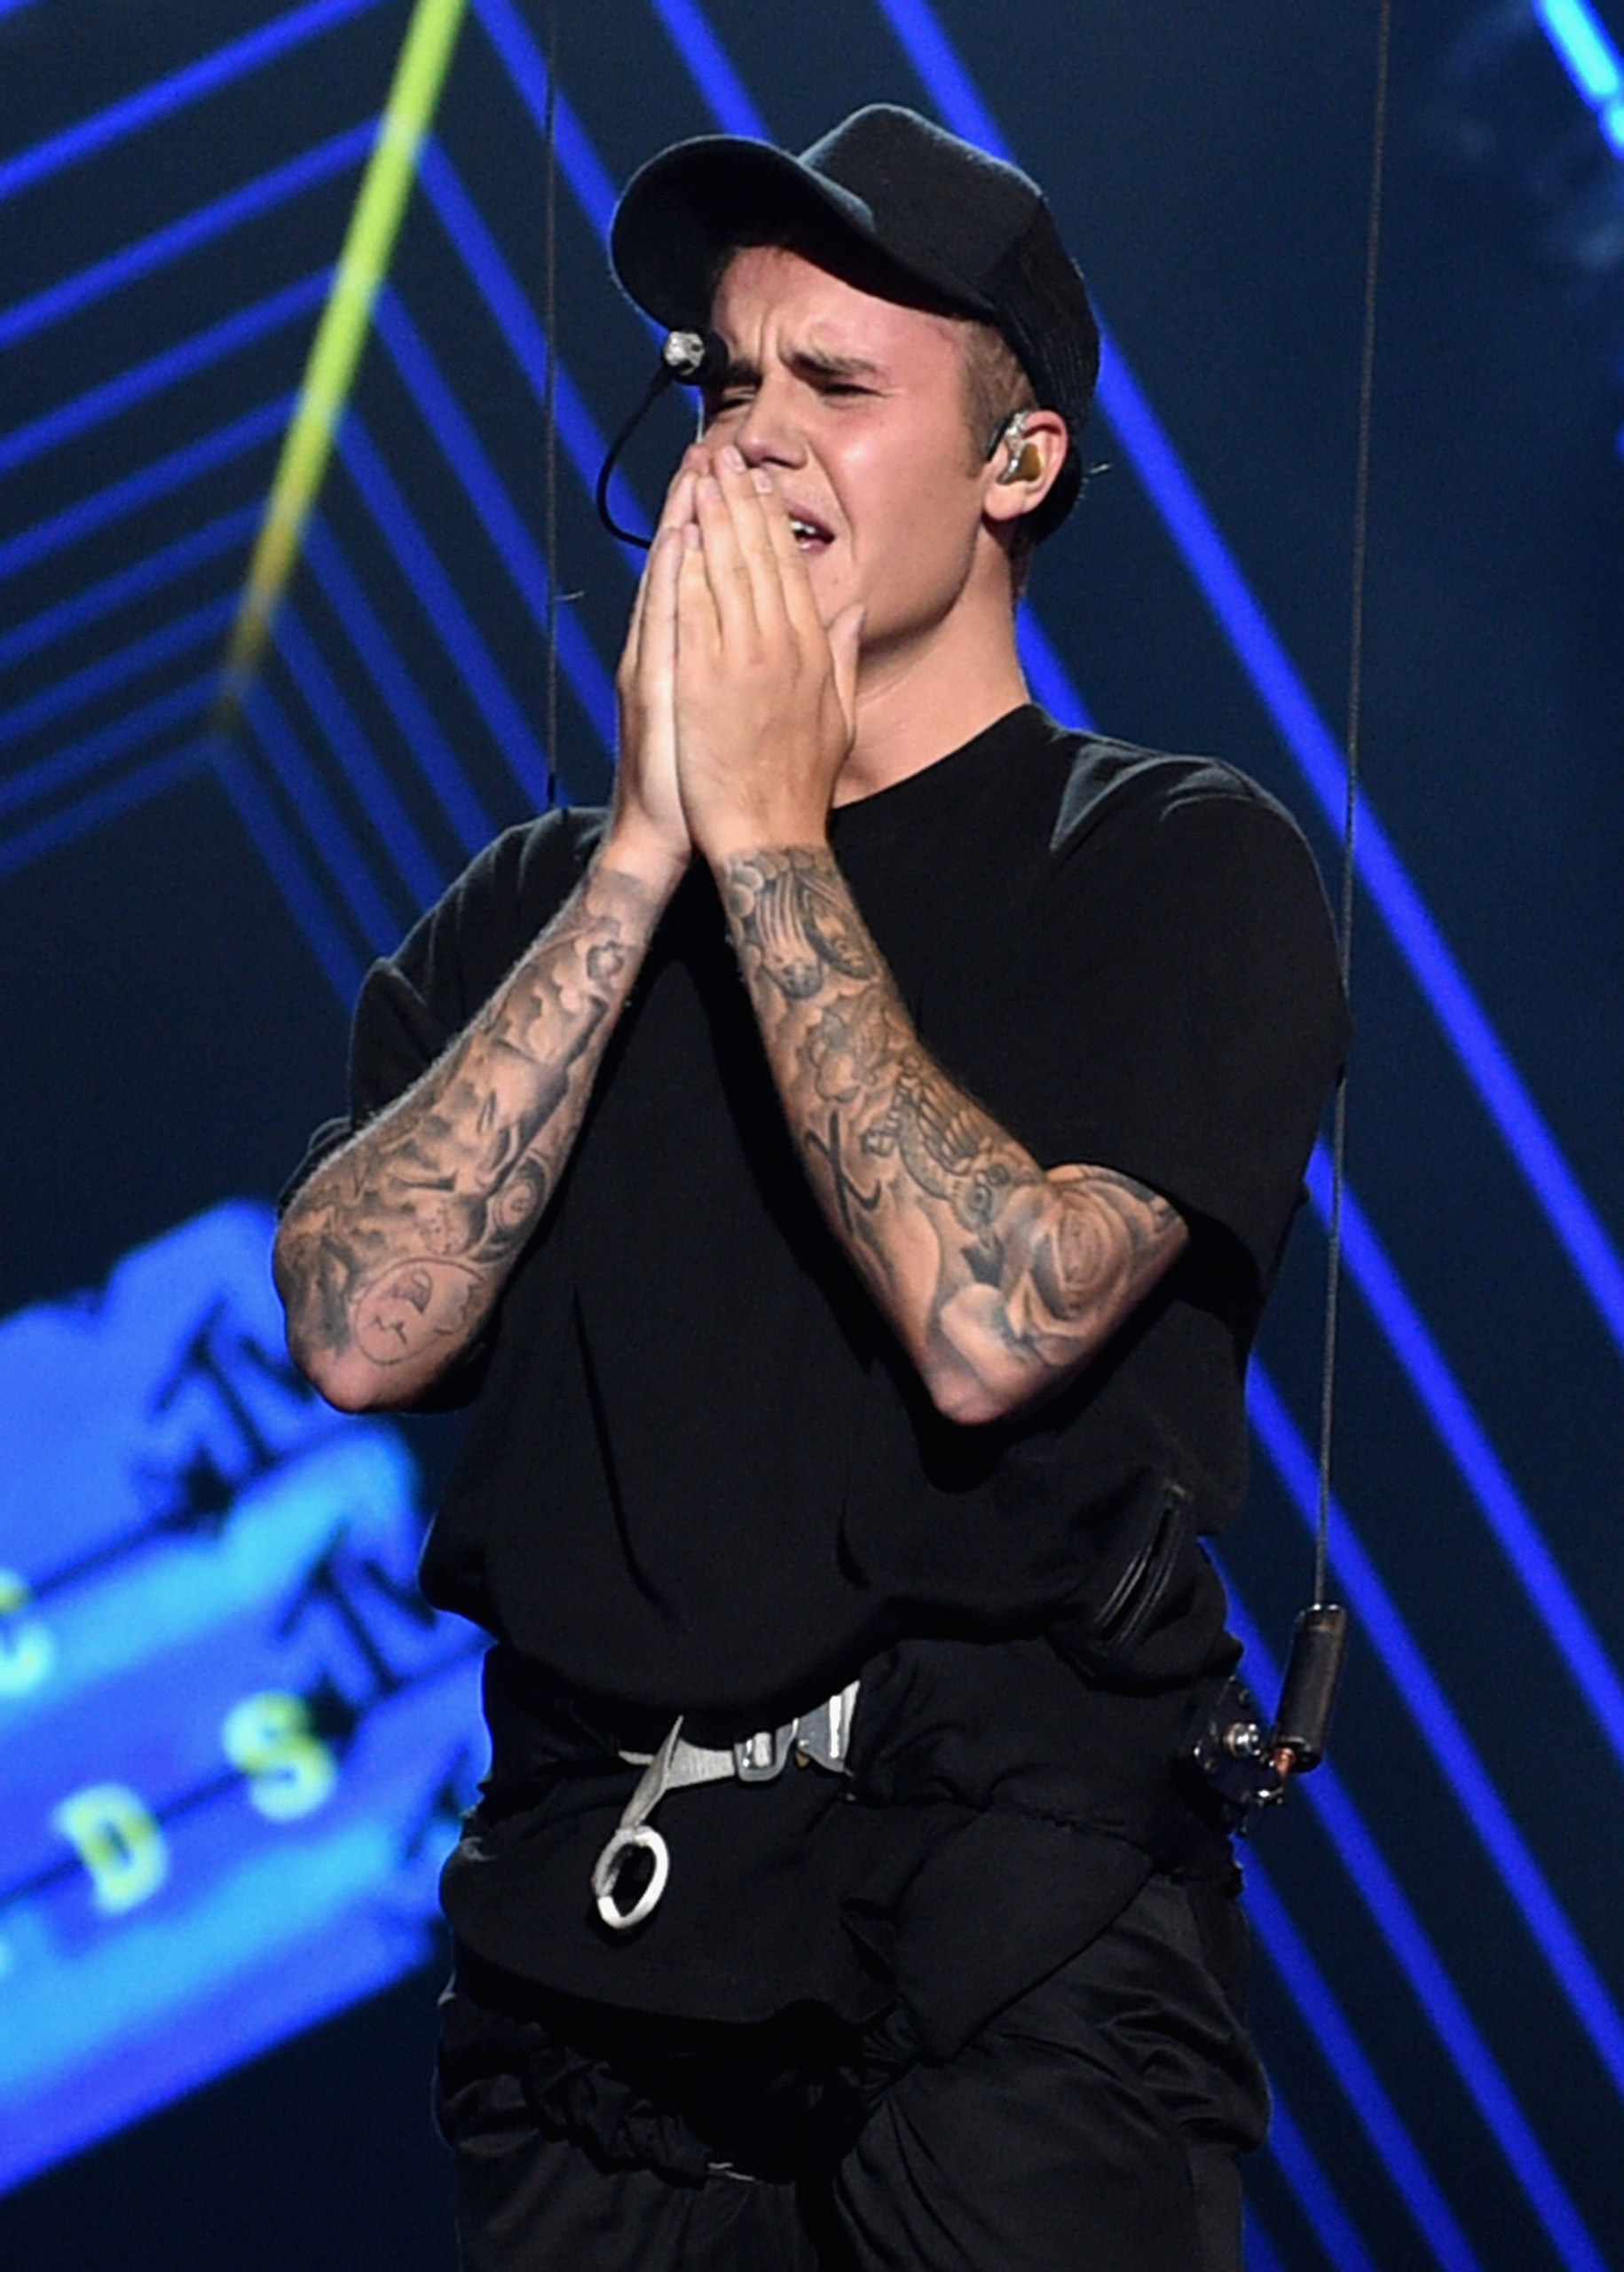 LOS ANGELES, CA - AUGUST 30: Singer Justin Bieber performs onstage during the 2015 MTV Video Music Awards at Microsoft Theater on August 30, 2015 in Los Angeles, California. (Photo by John Shearer/Getty Images)